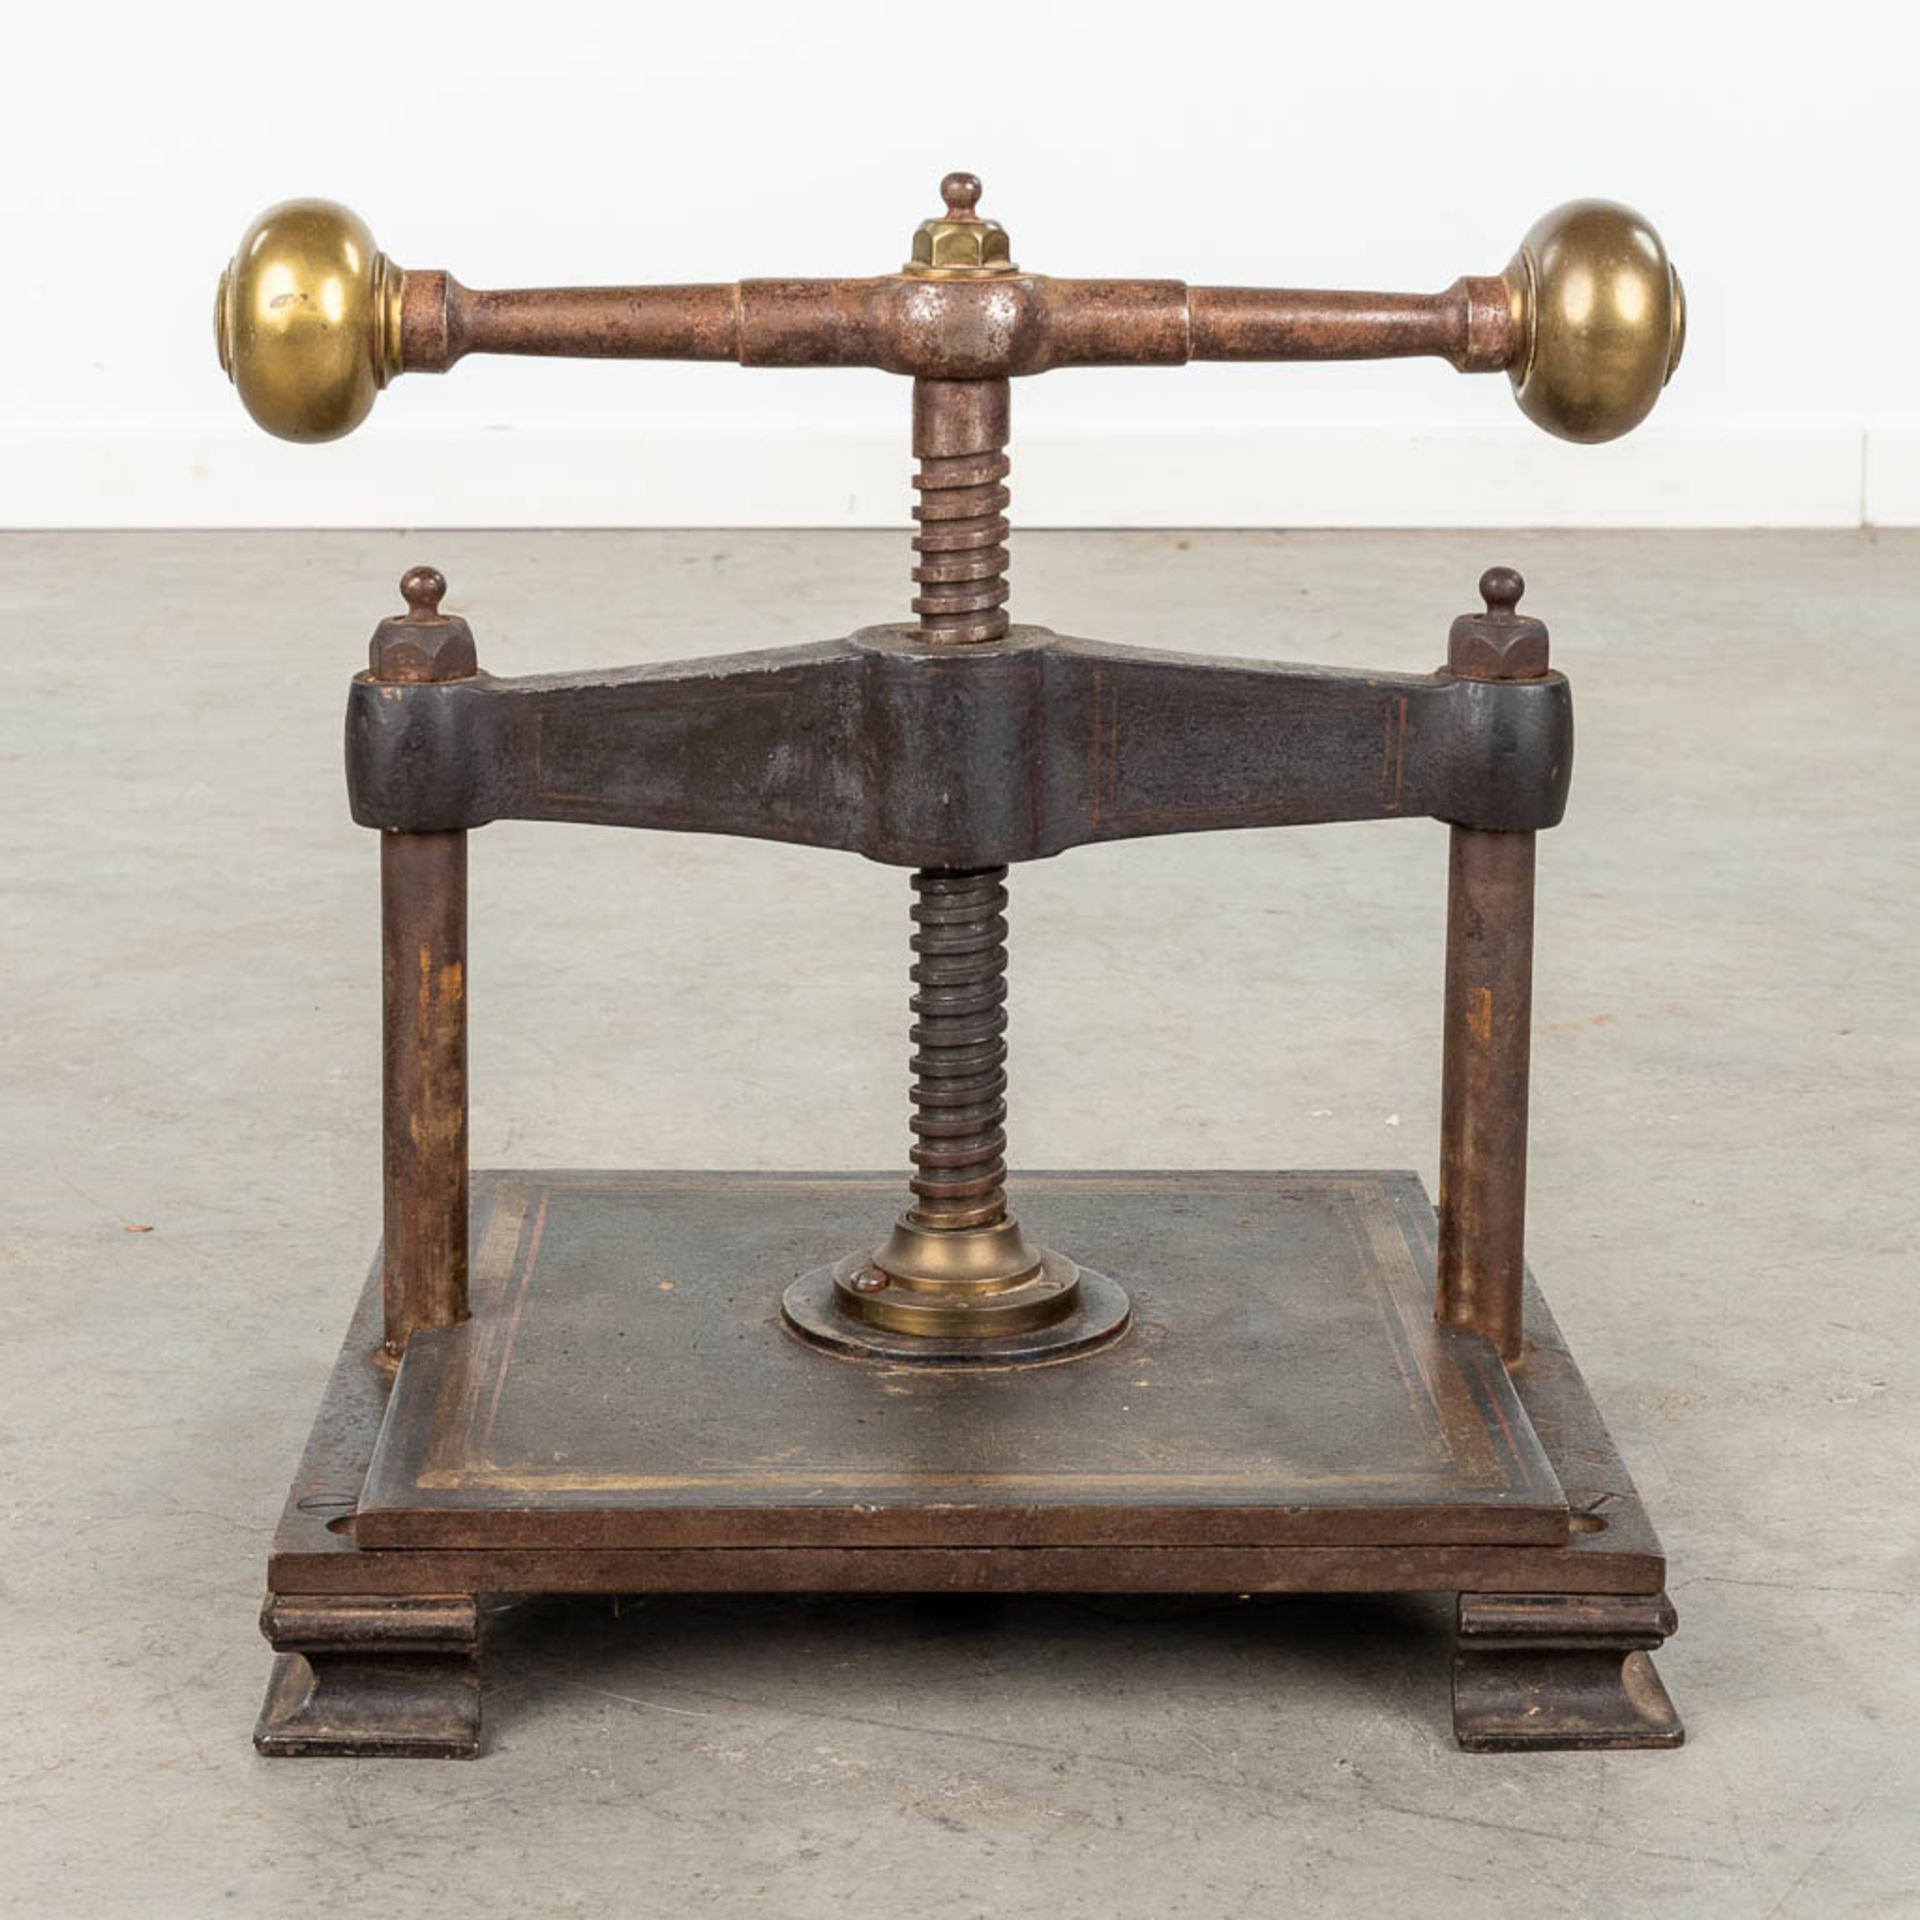 An antique book press, made of metal. (L:30 x W:38 x H:36 cm) - Image 5 of 11